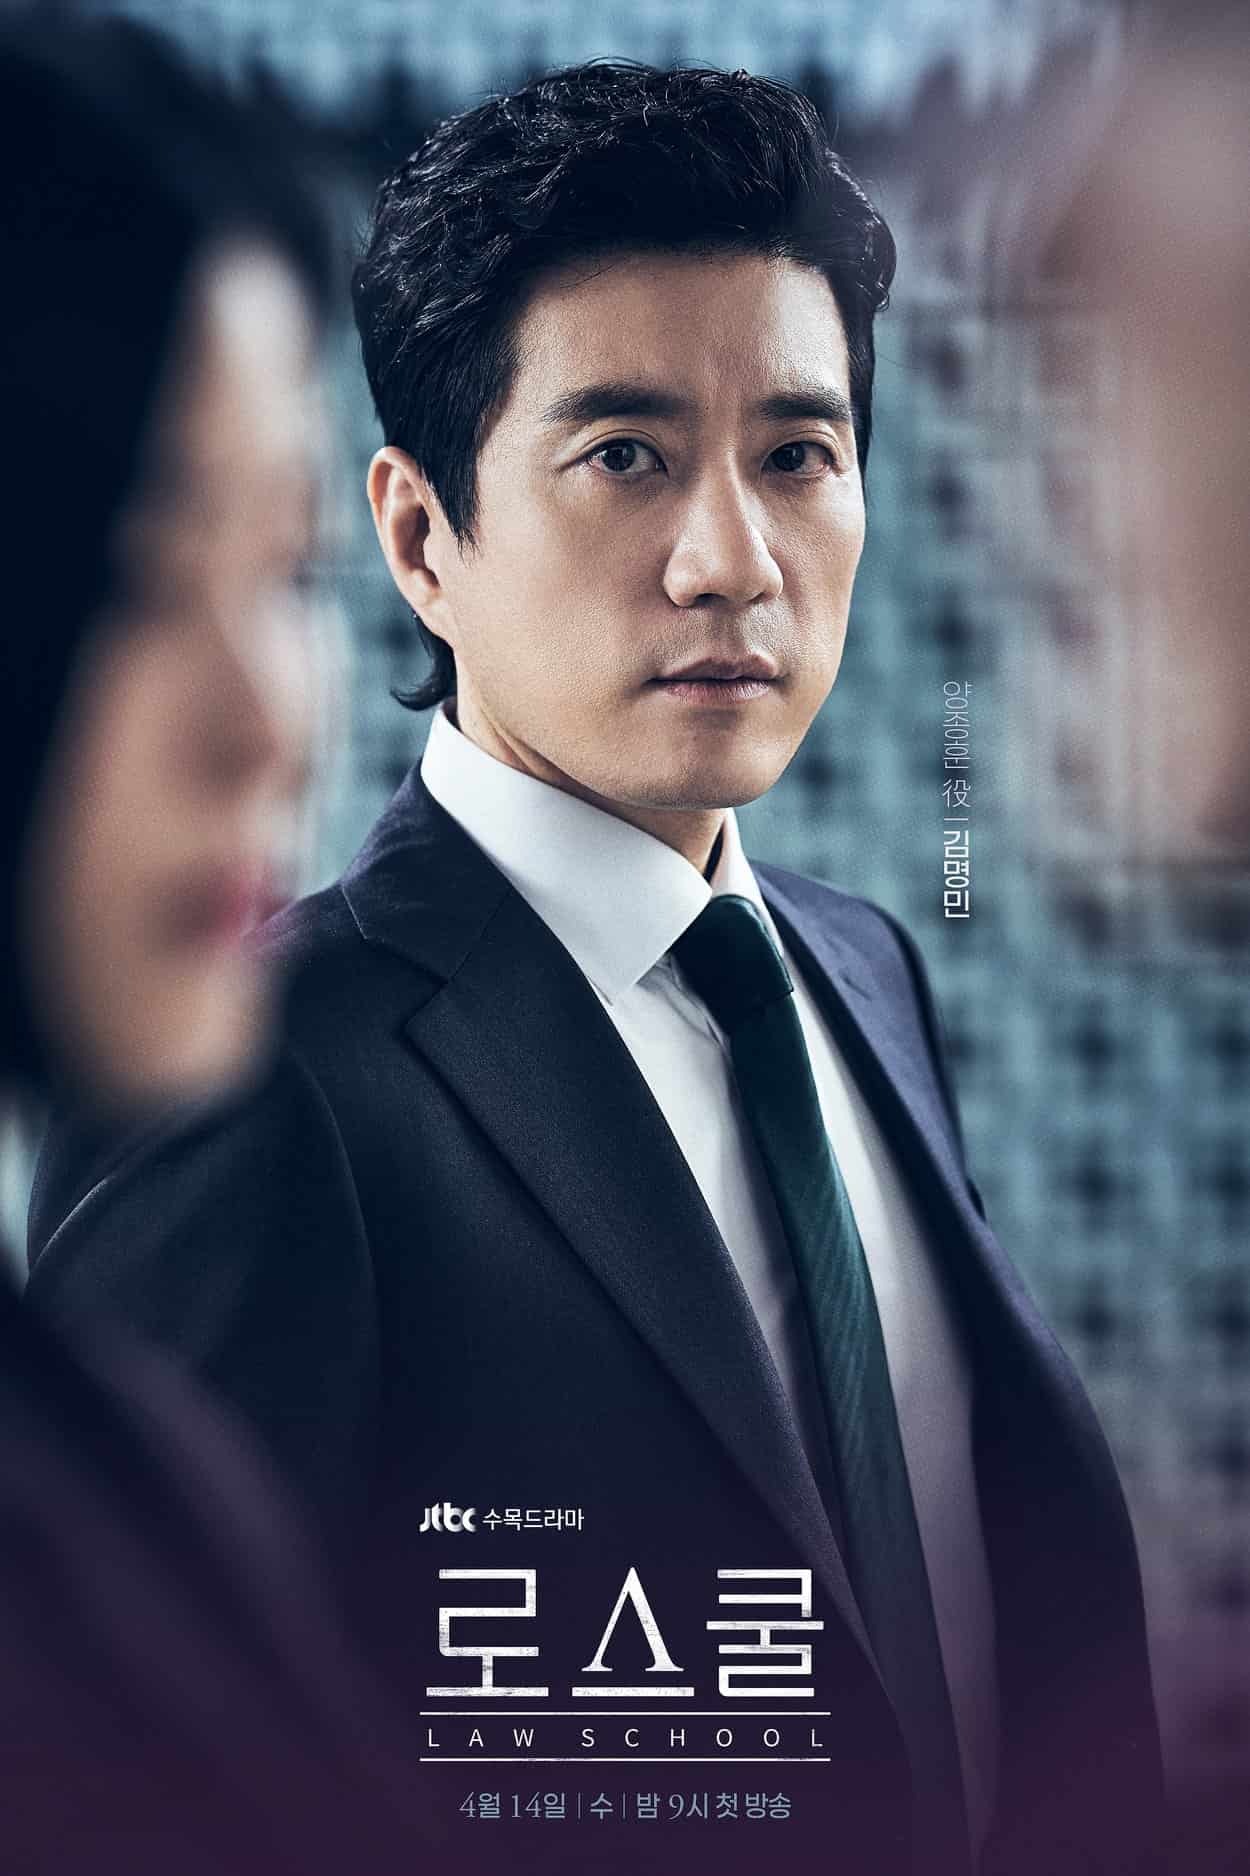 Law School - Cast, Summary, Synopsis, OST, Episode, Review